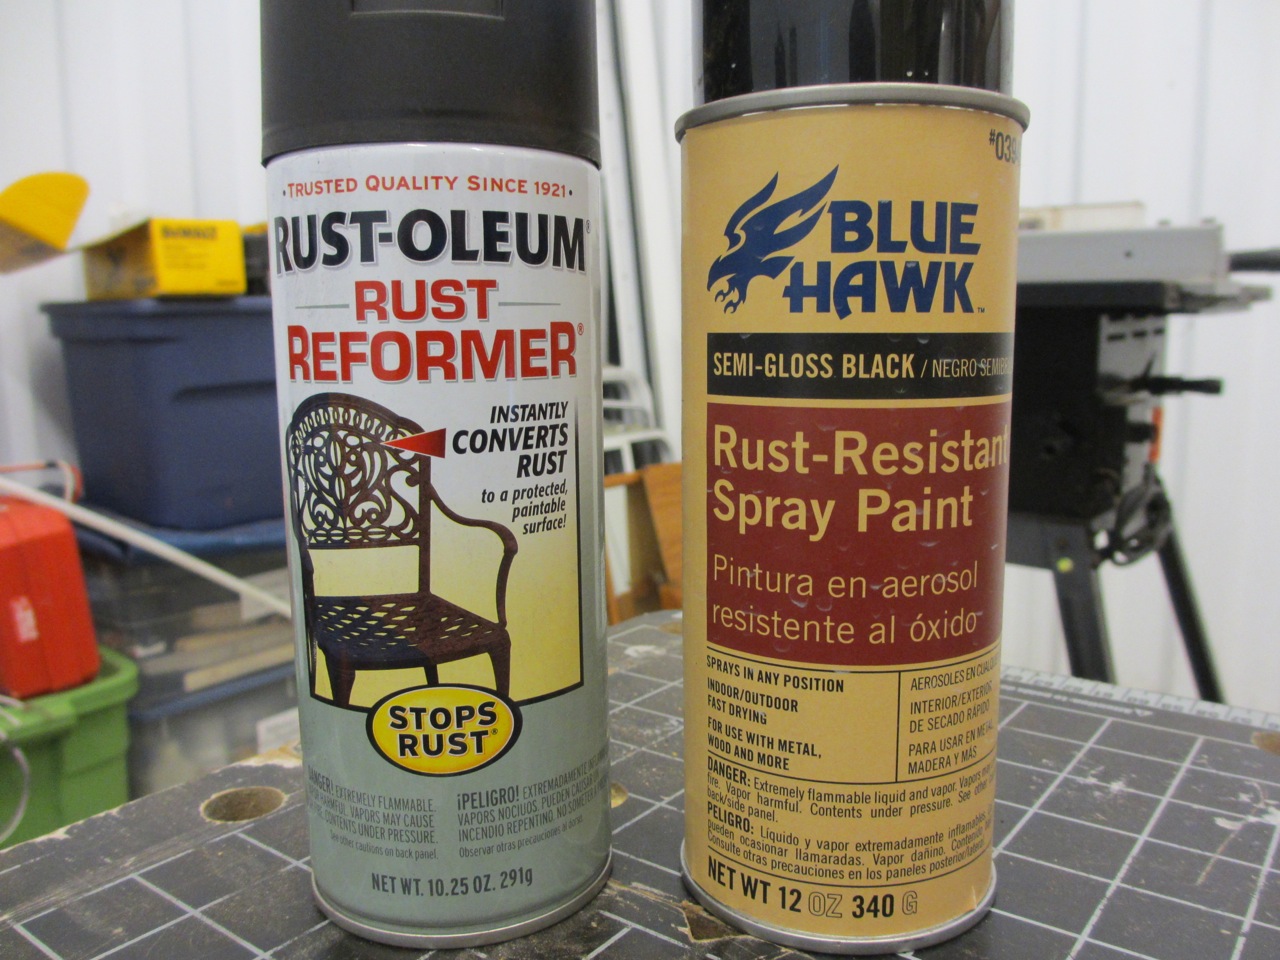  Once the rust was all removed, we first sprayed the chassis with Rust Reformer primer. The primer stops any additional rusting from any leftover rust that may still be on the metal. Once that dried (20 - 30 minutes), we used the Rust Resistant spray